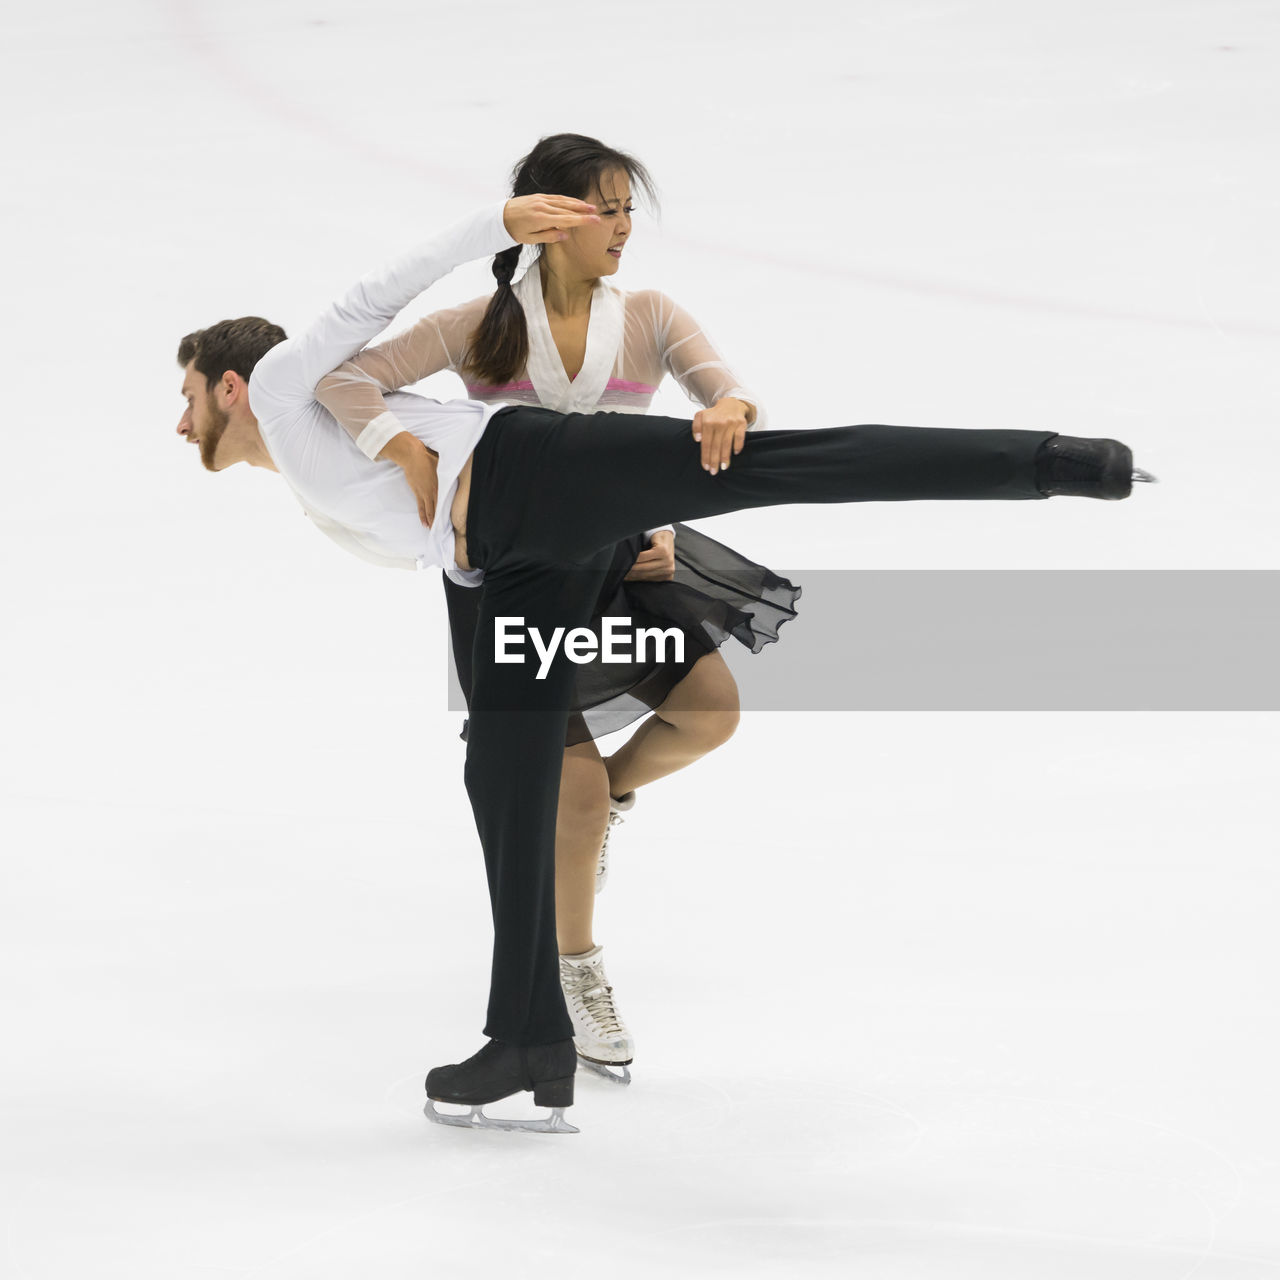 Man and woman performing during figure skating against white background